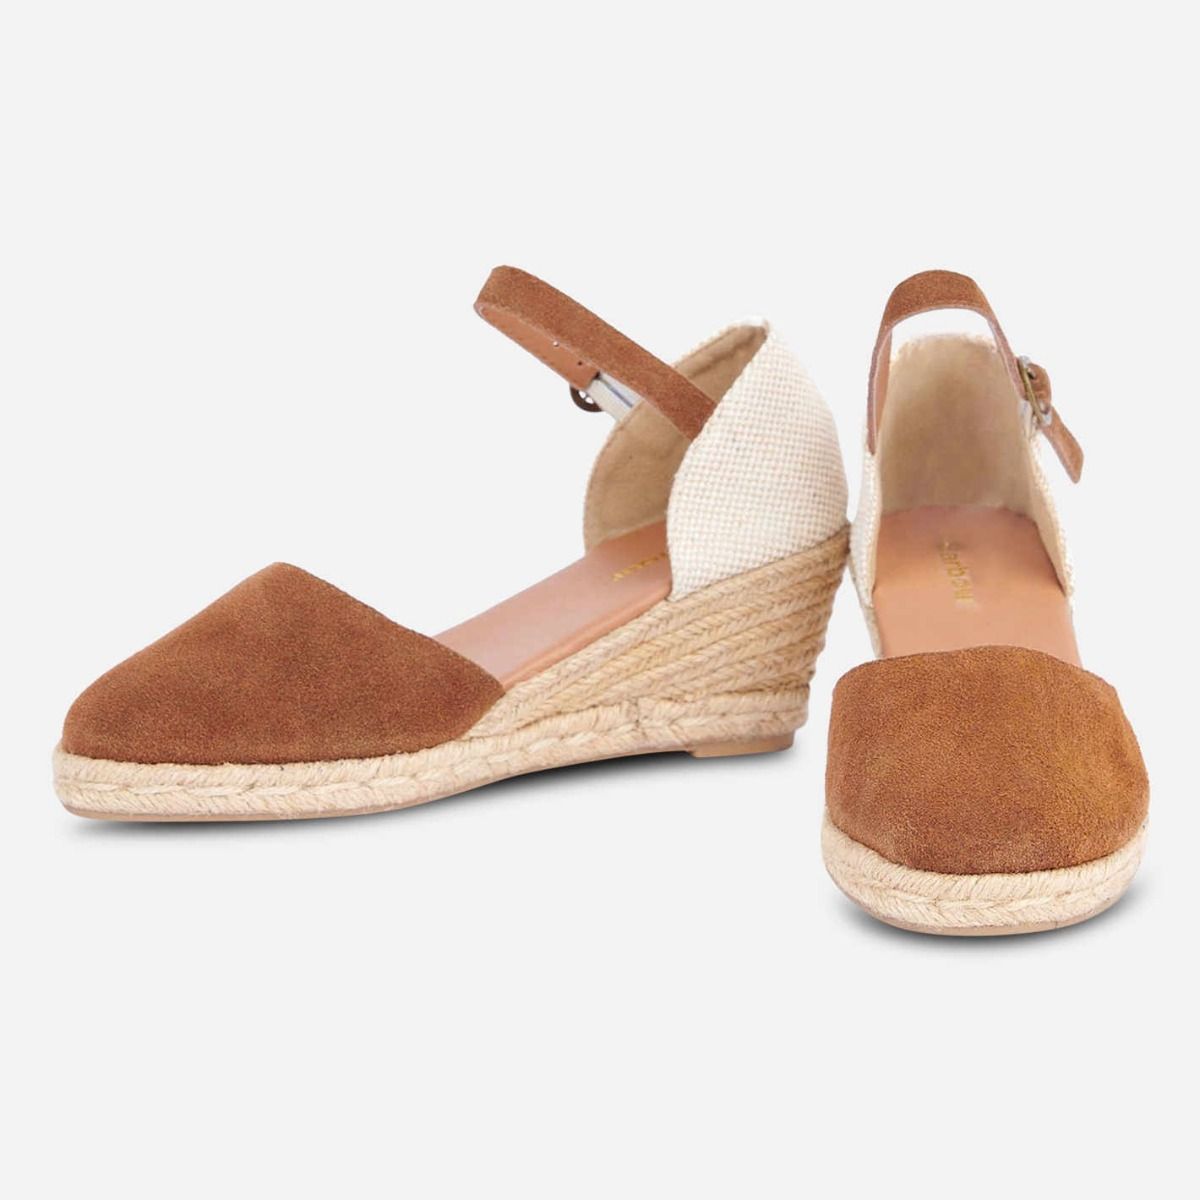 LADIES TWO PART HESSIAN WEDGE SANDALS 